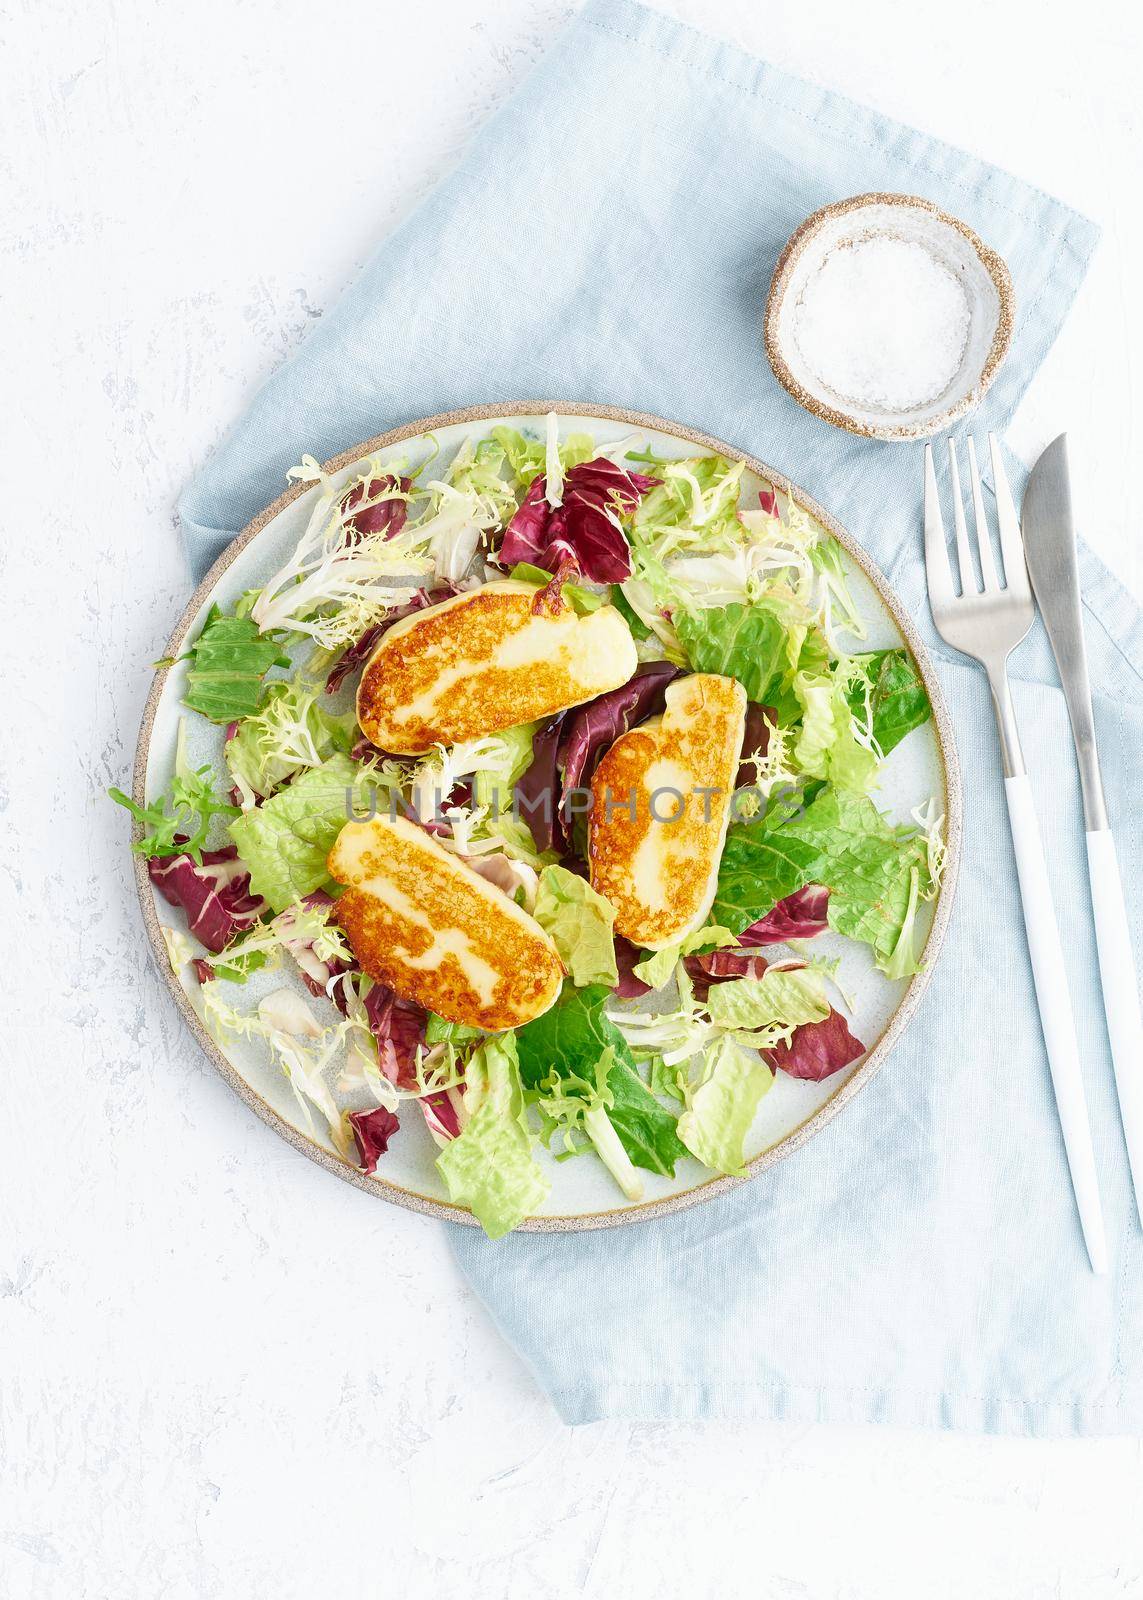 Cyprus fried halloumi with healthy salad. Lchf, pegan, fodmap, paleo, scd, keto, ketogenic diet. Balanced food, clean eating recipe. Vertical